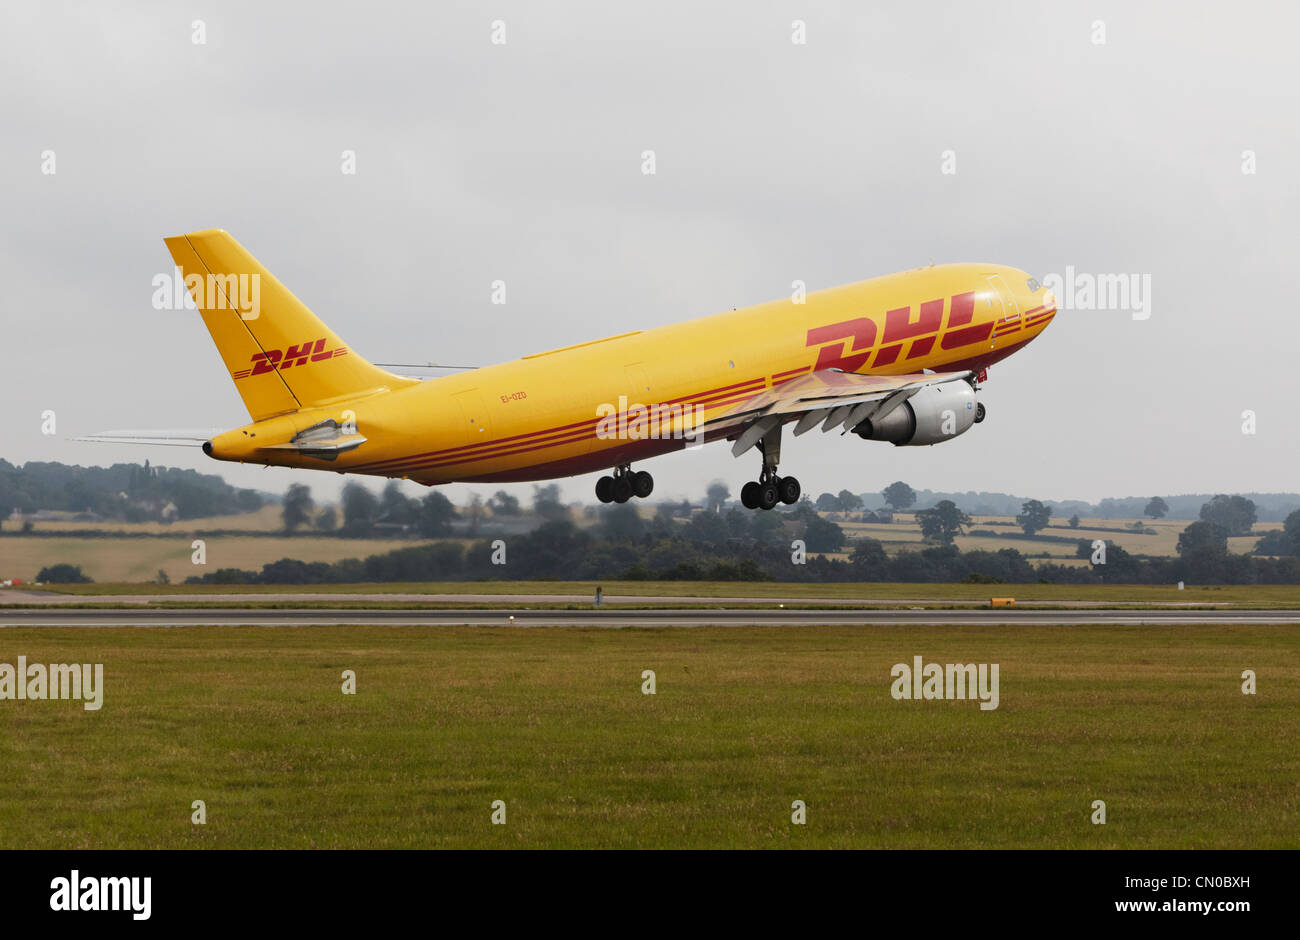 Dhl Logistik High Resolution Stock Photography and Images - Alamy